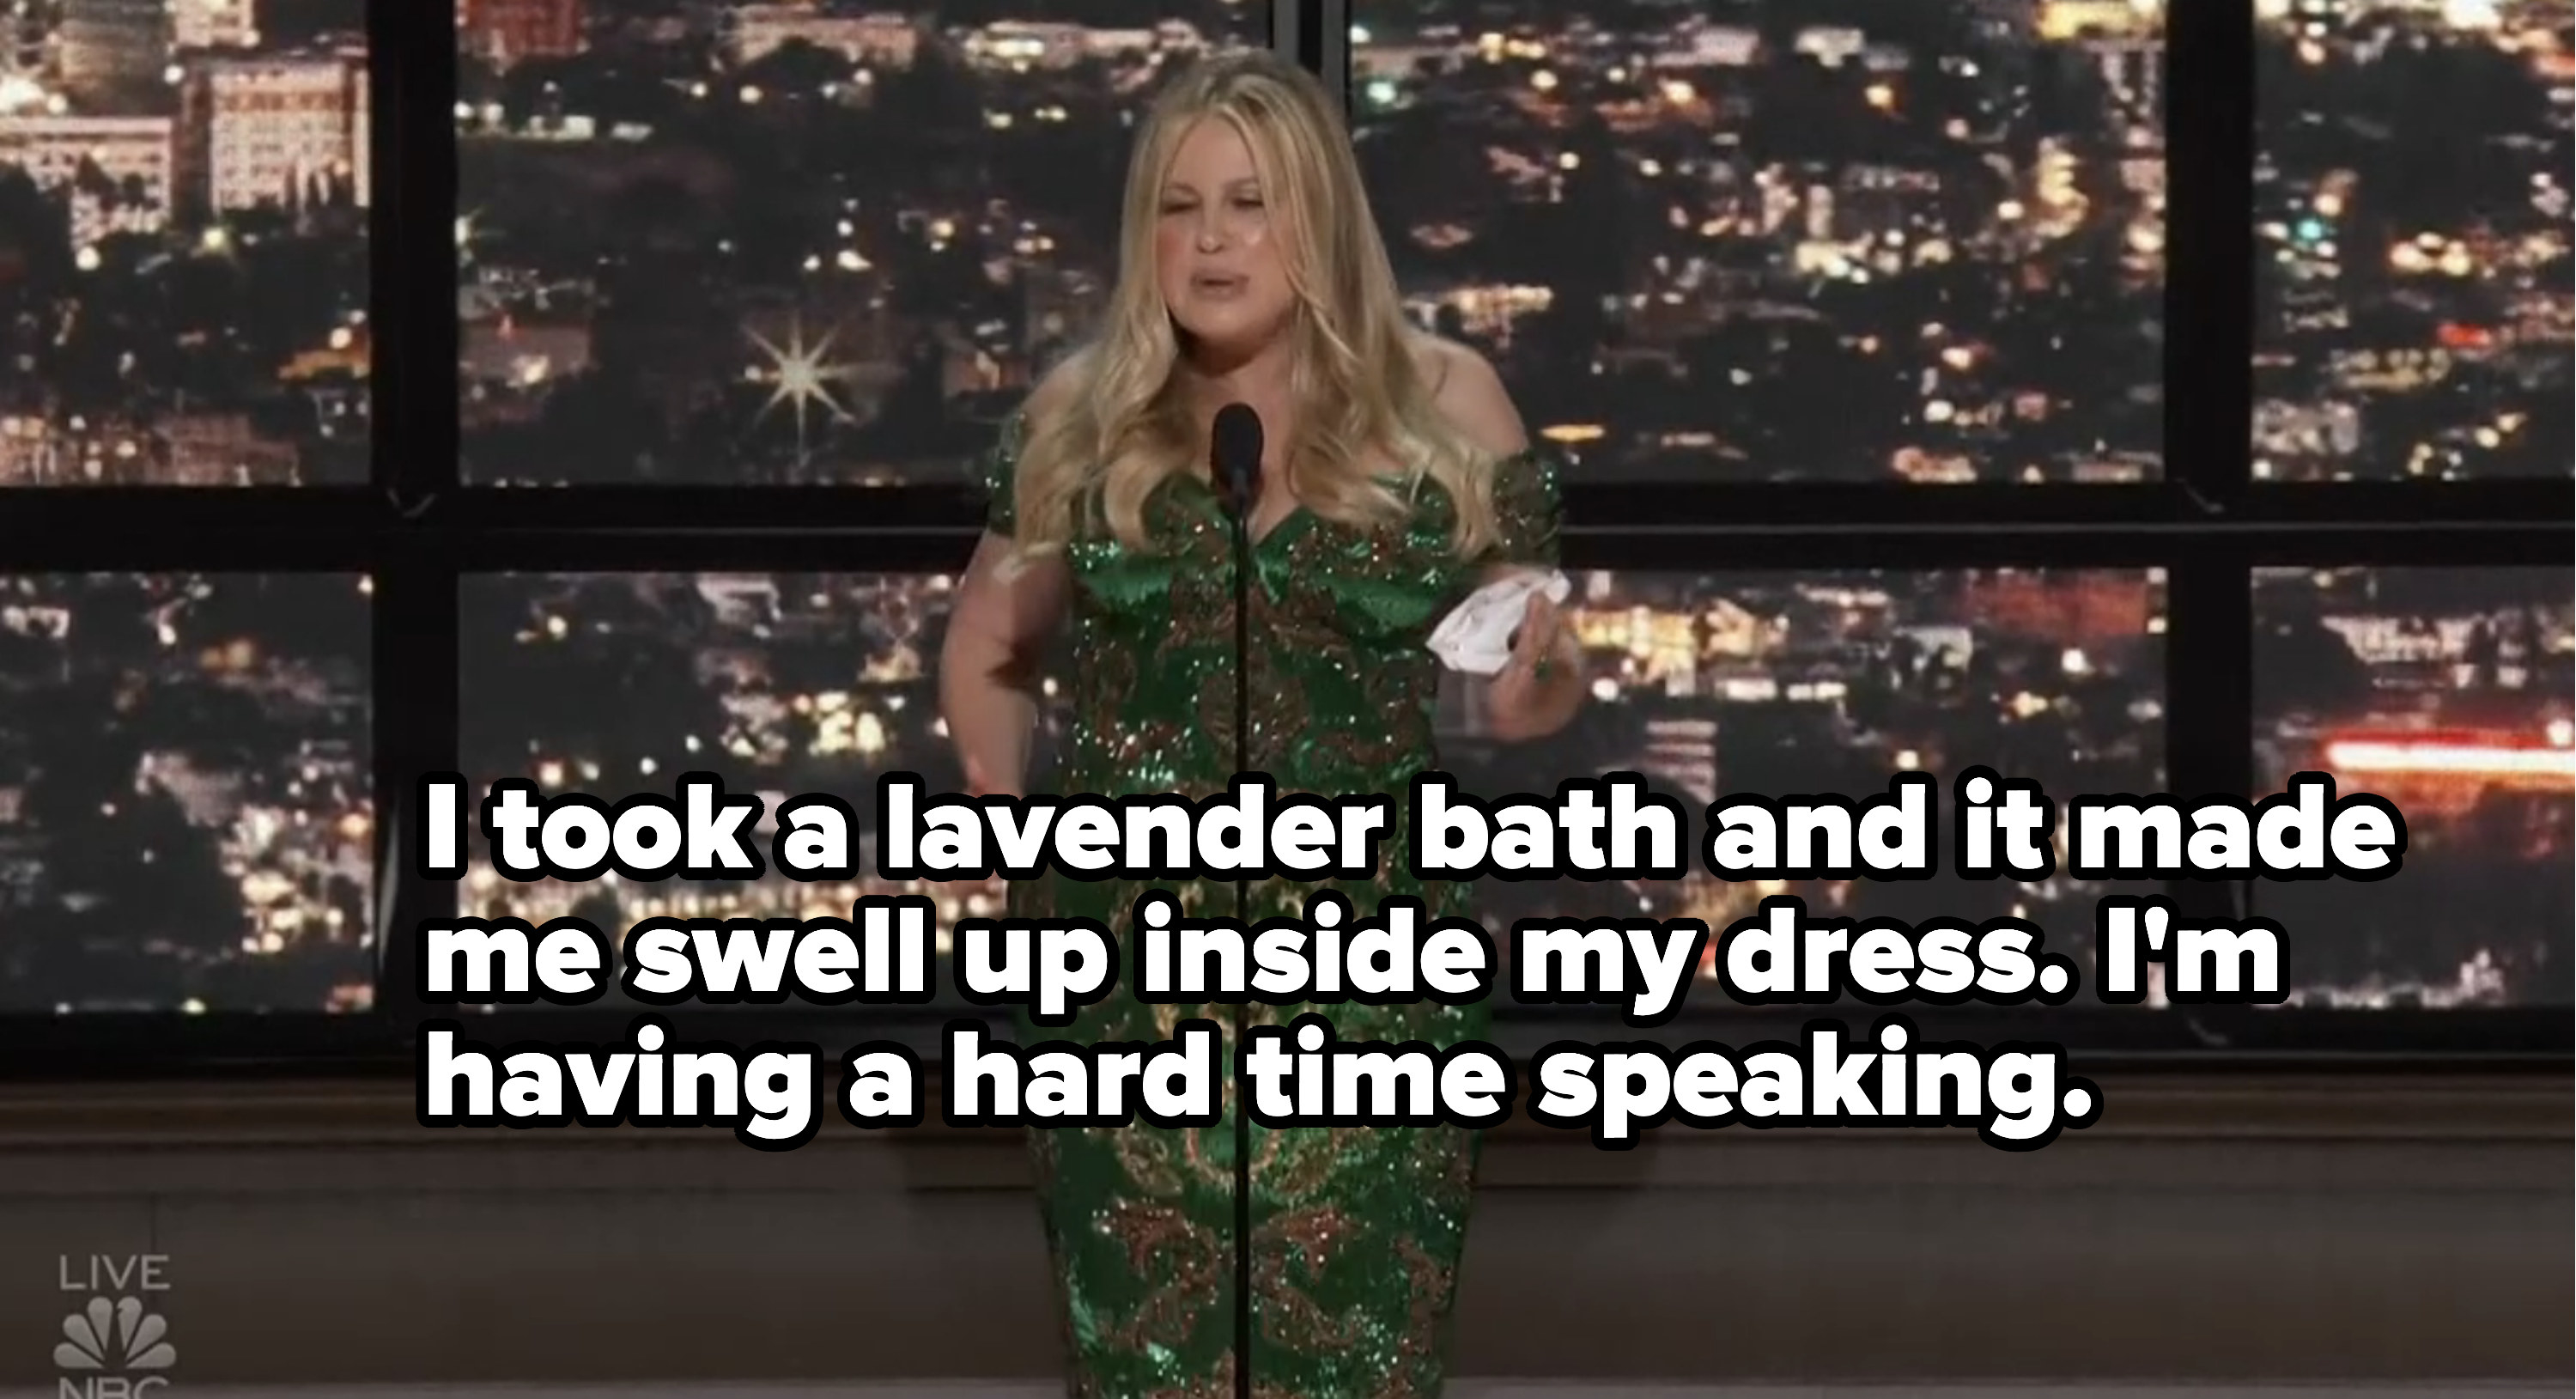 Jennifer Coolidge saying she took a lavender bath and it made her swell up